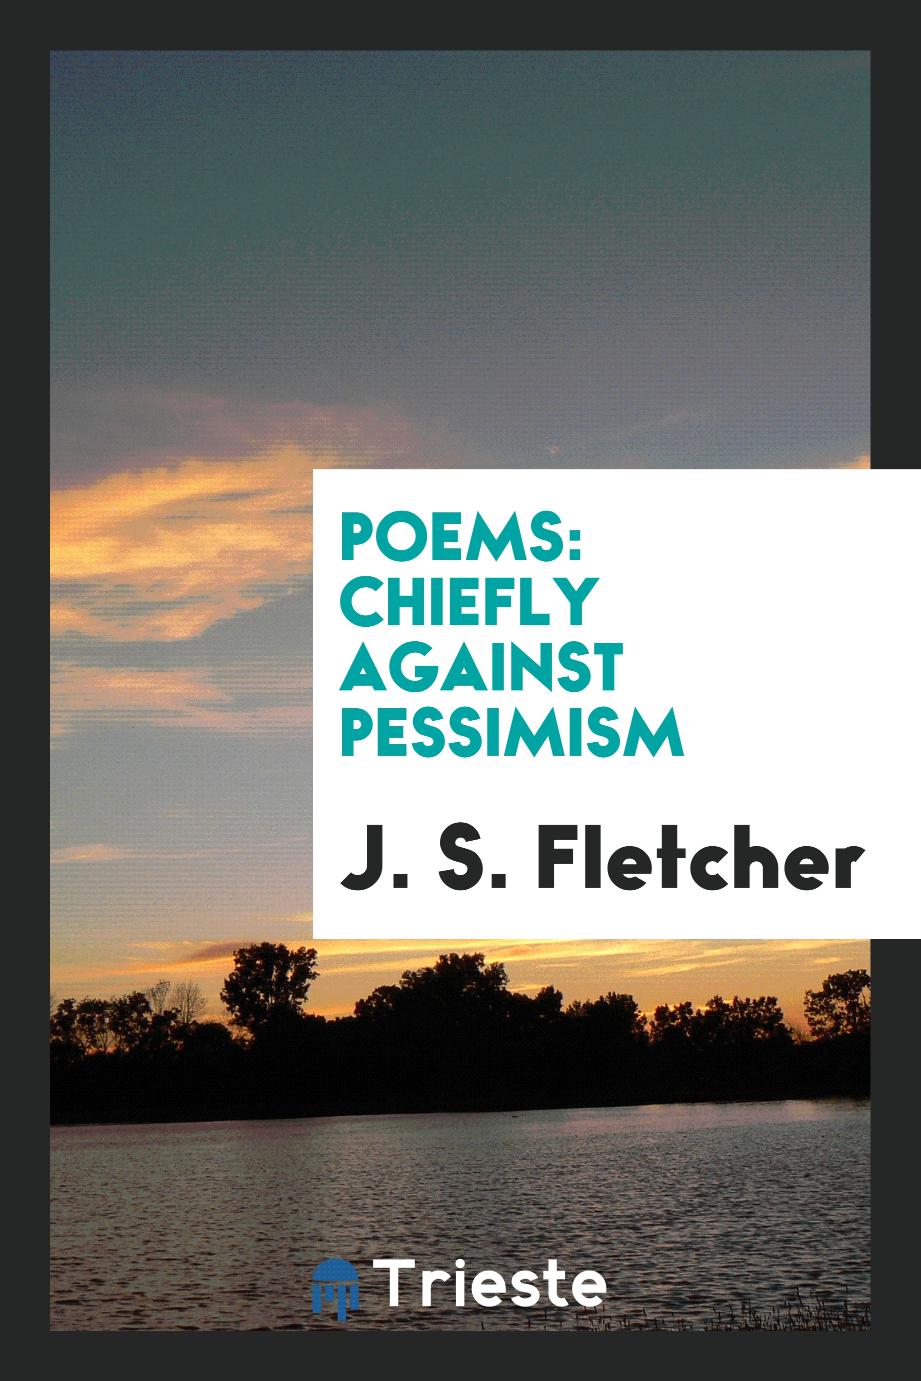 Poems: Chiefly Against Pessimism